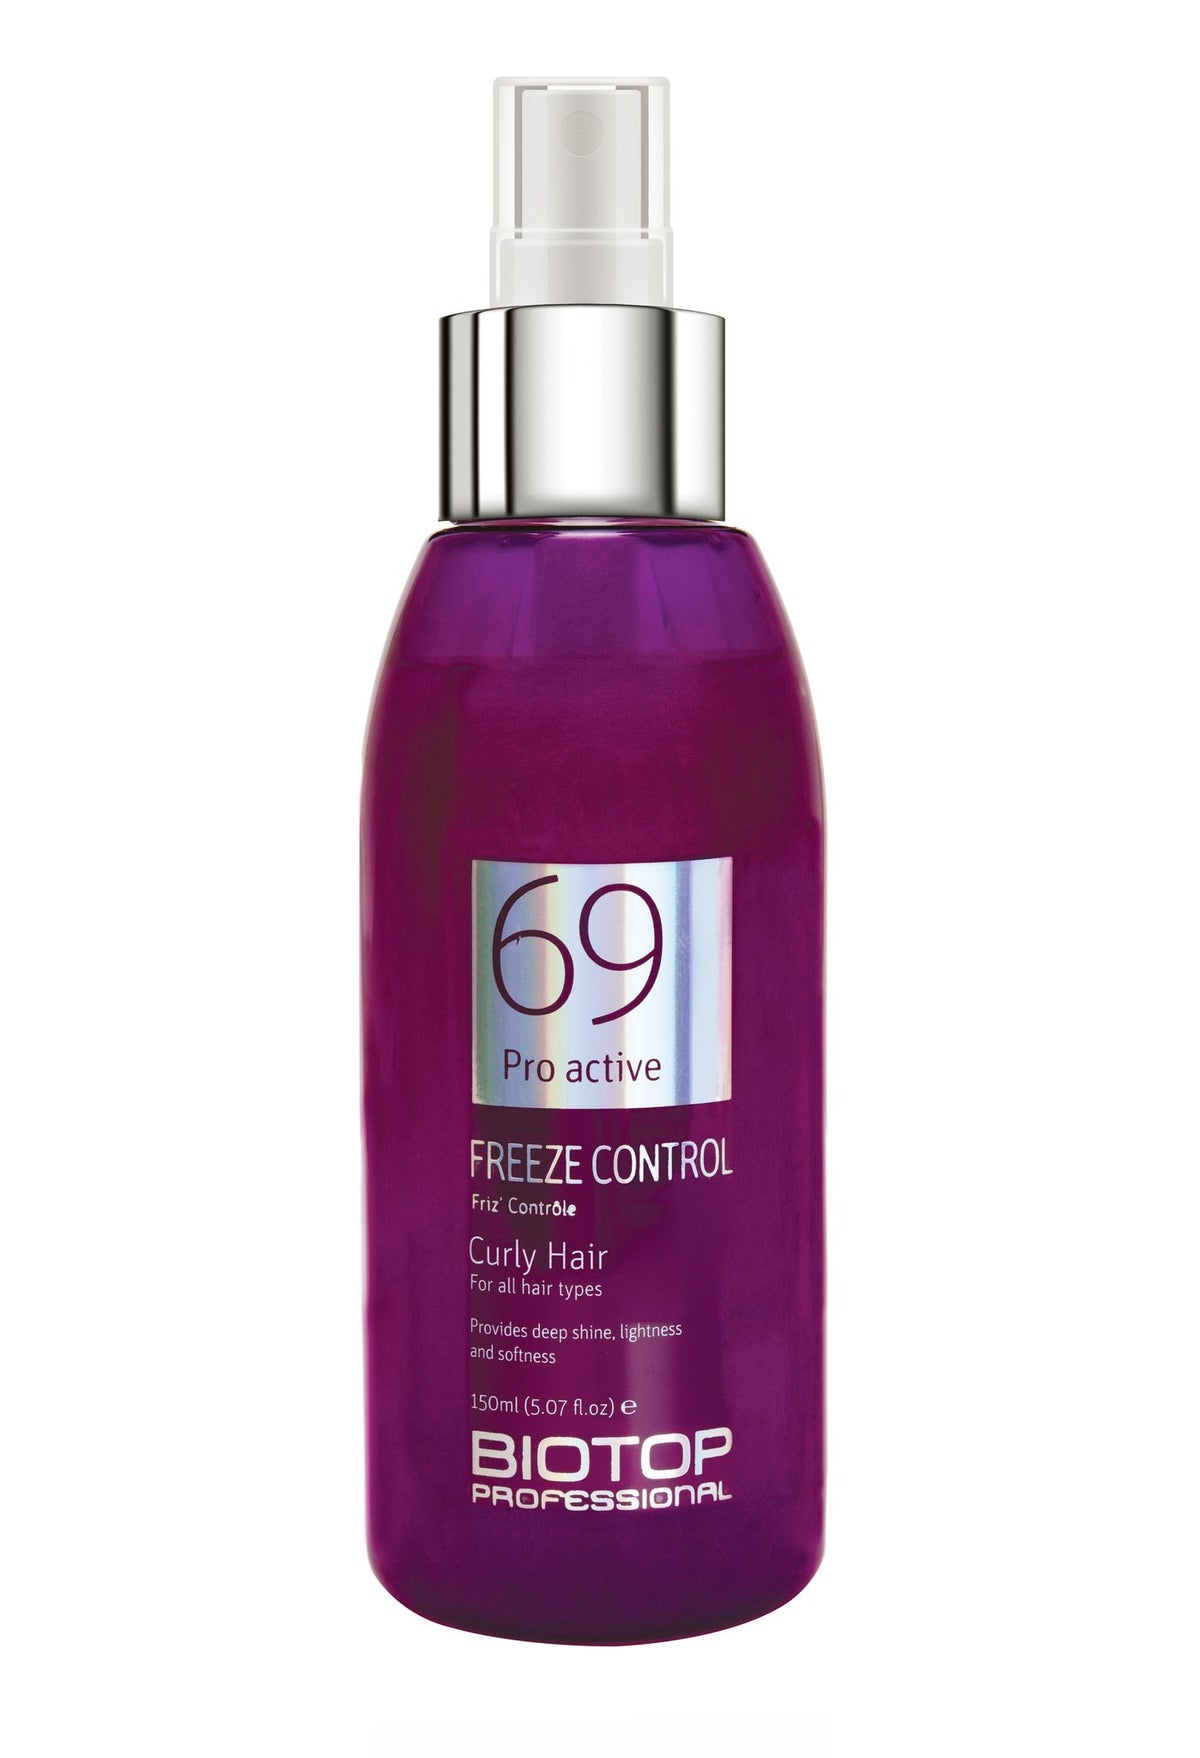 Biotop - 69 Curly Hair Frizz Control PRO ACTIVE 150ml